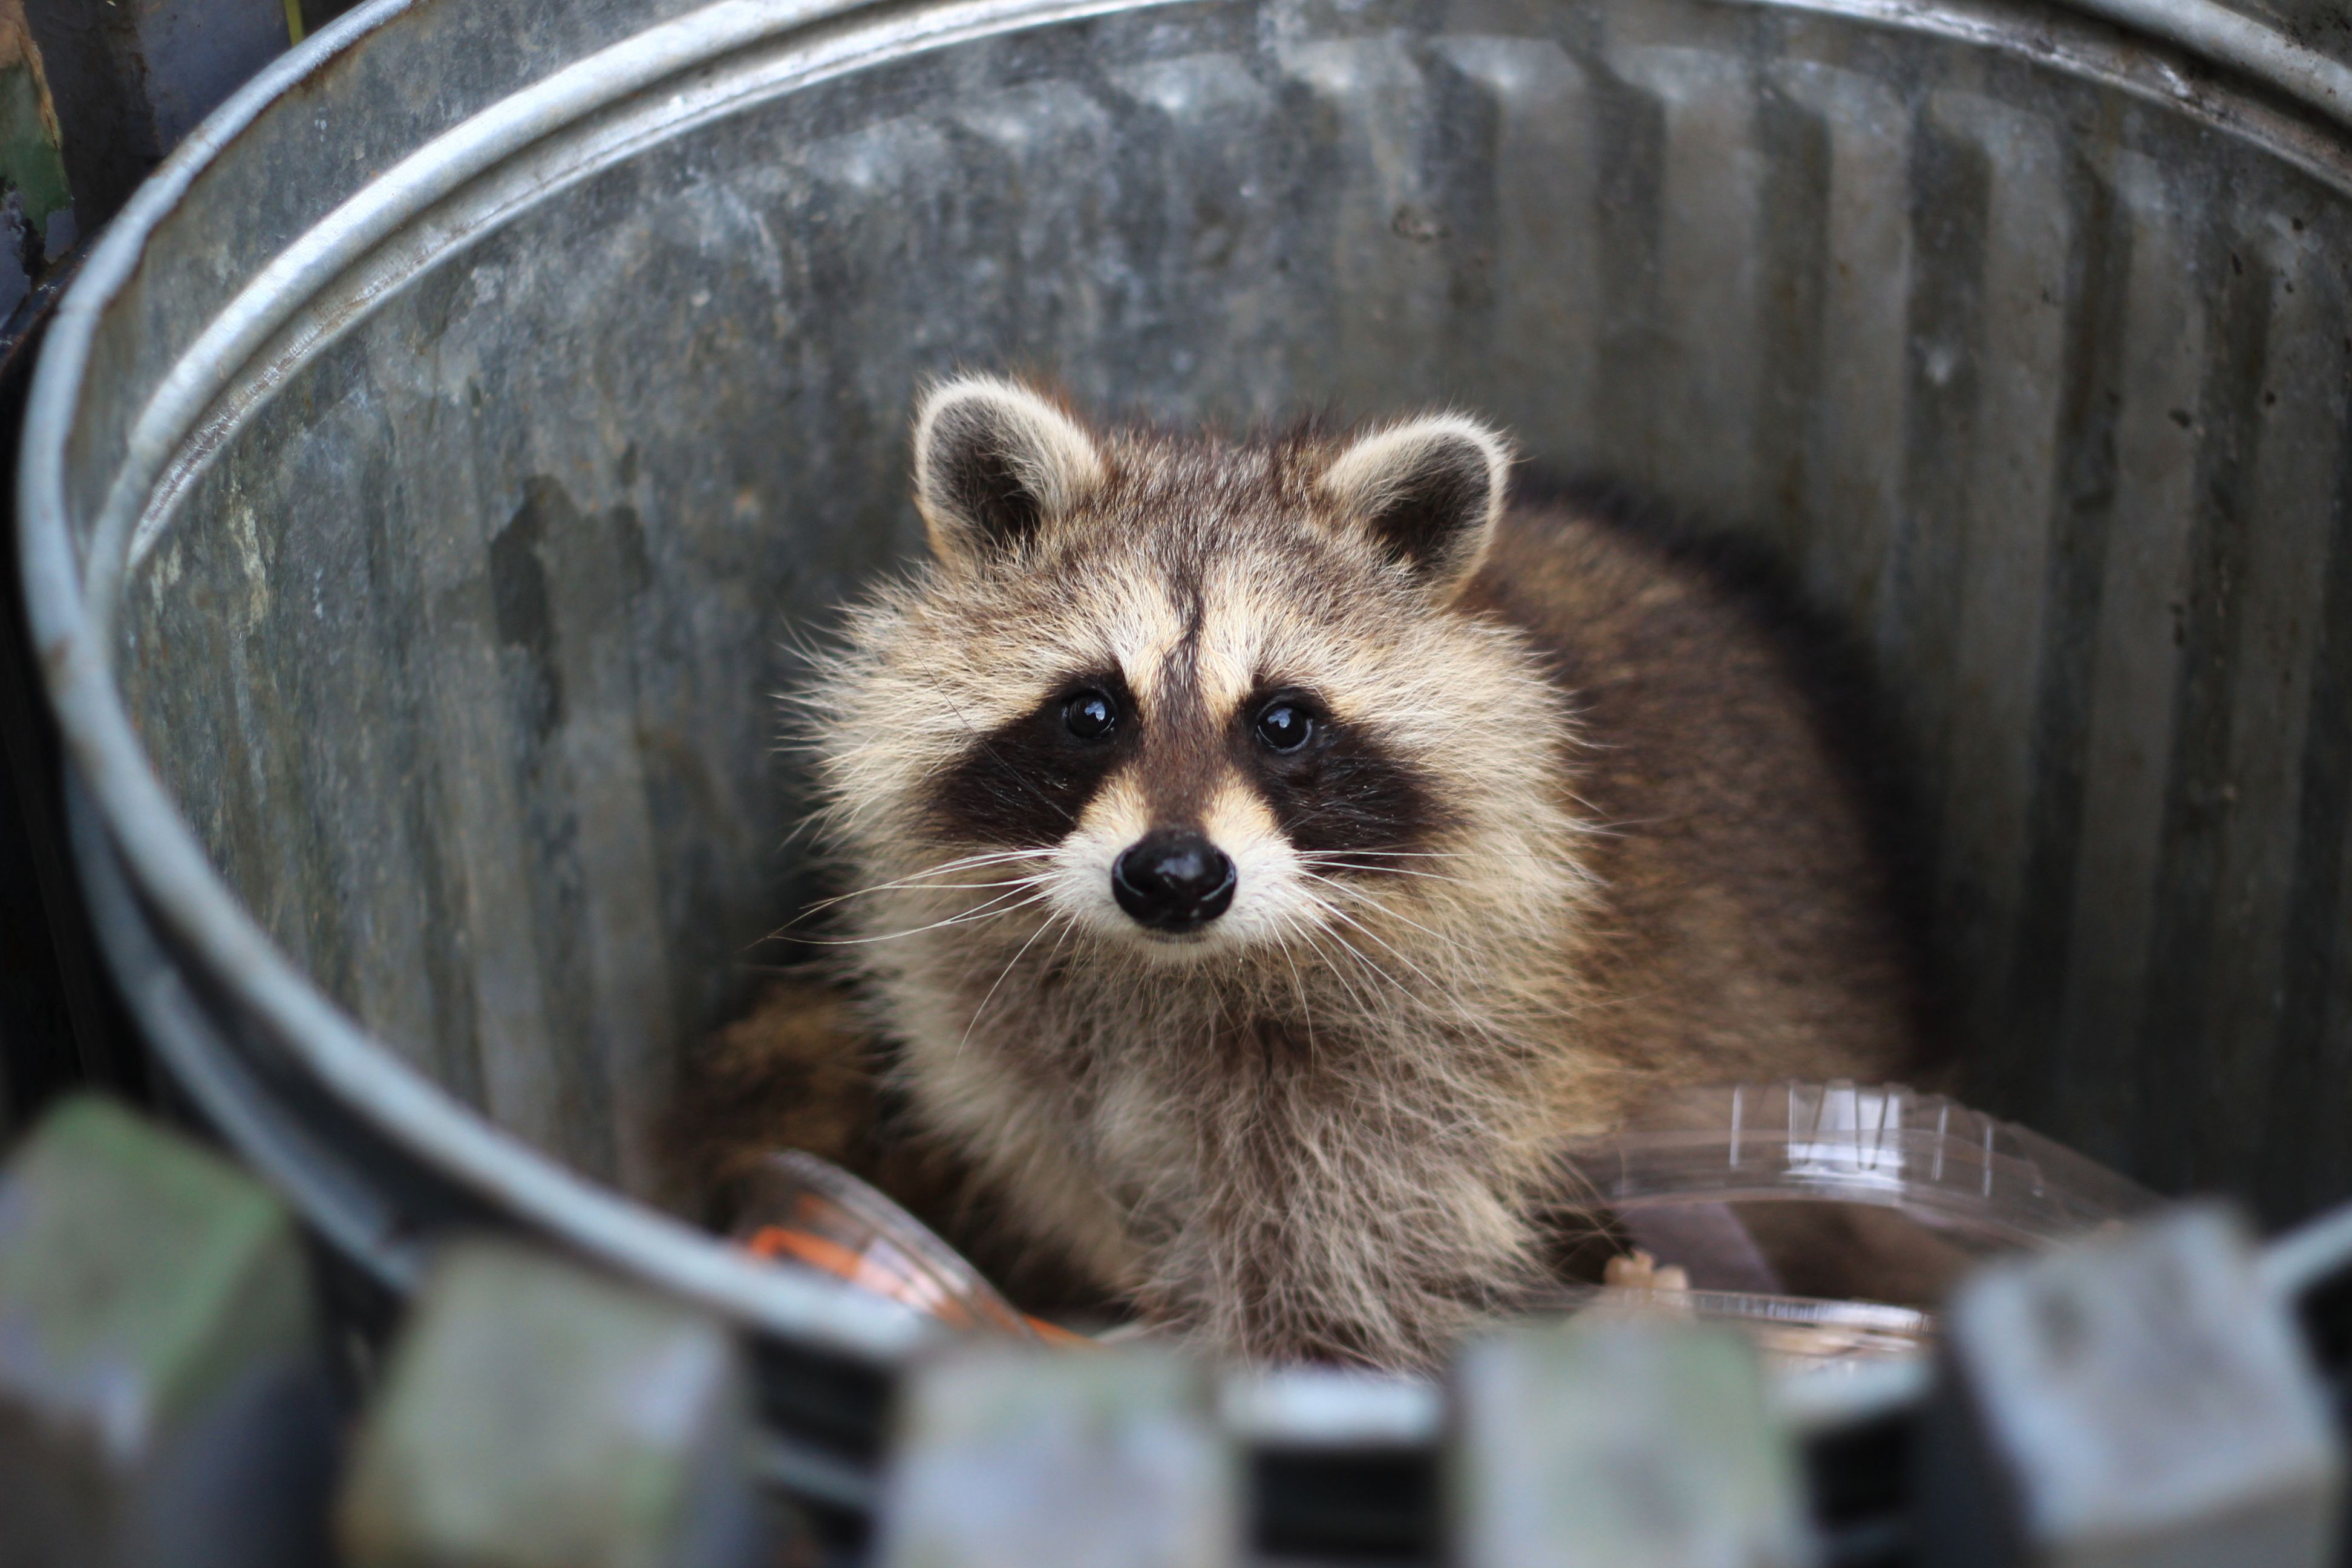 Racoon looking up sitting inside a trash can